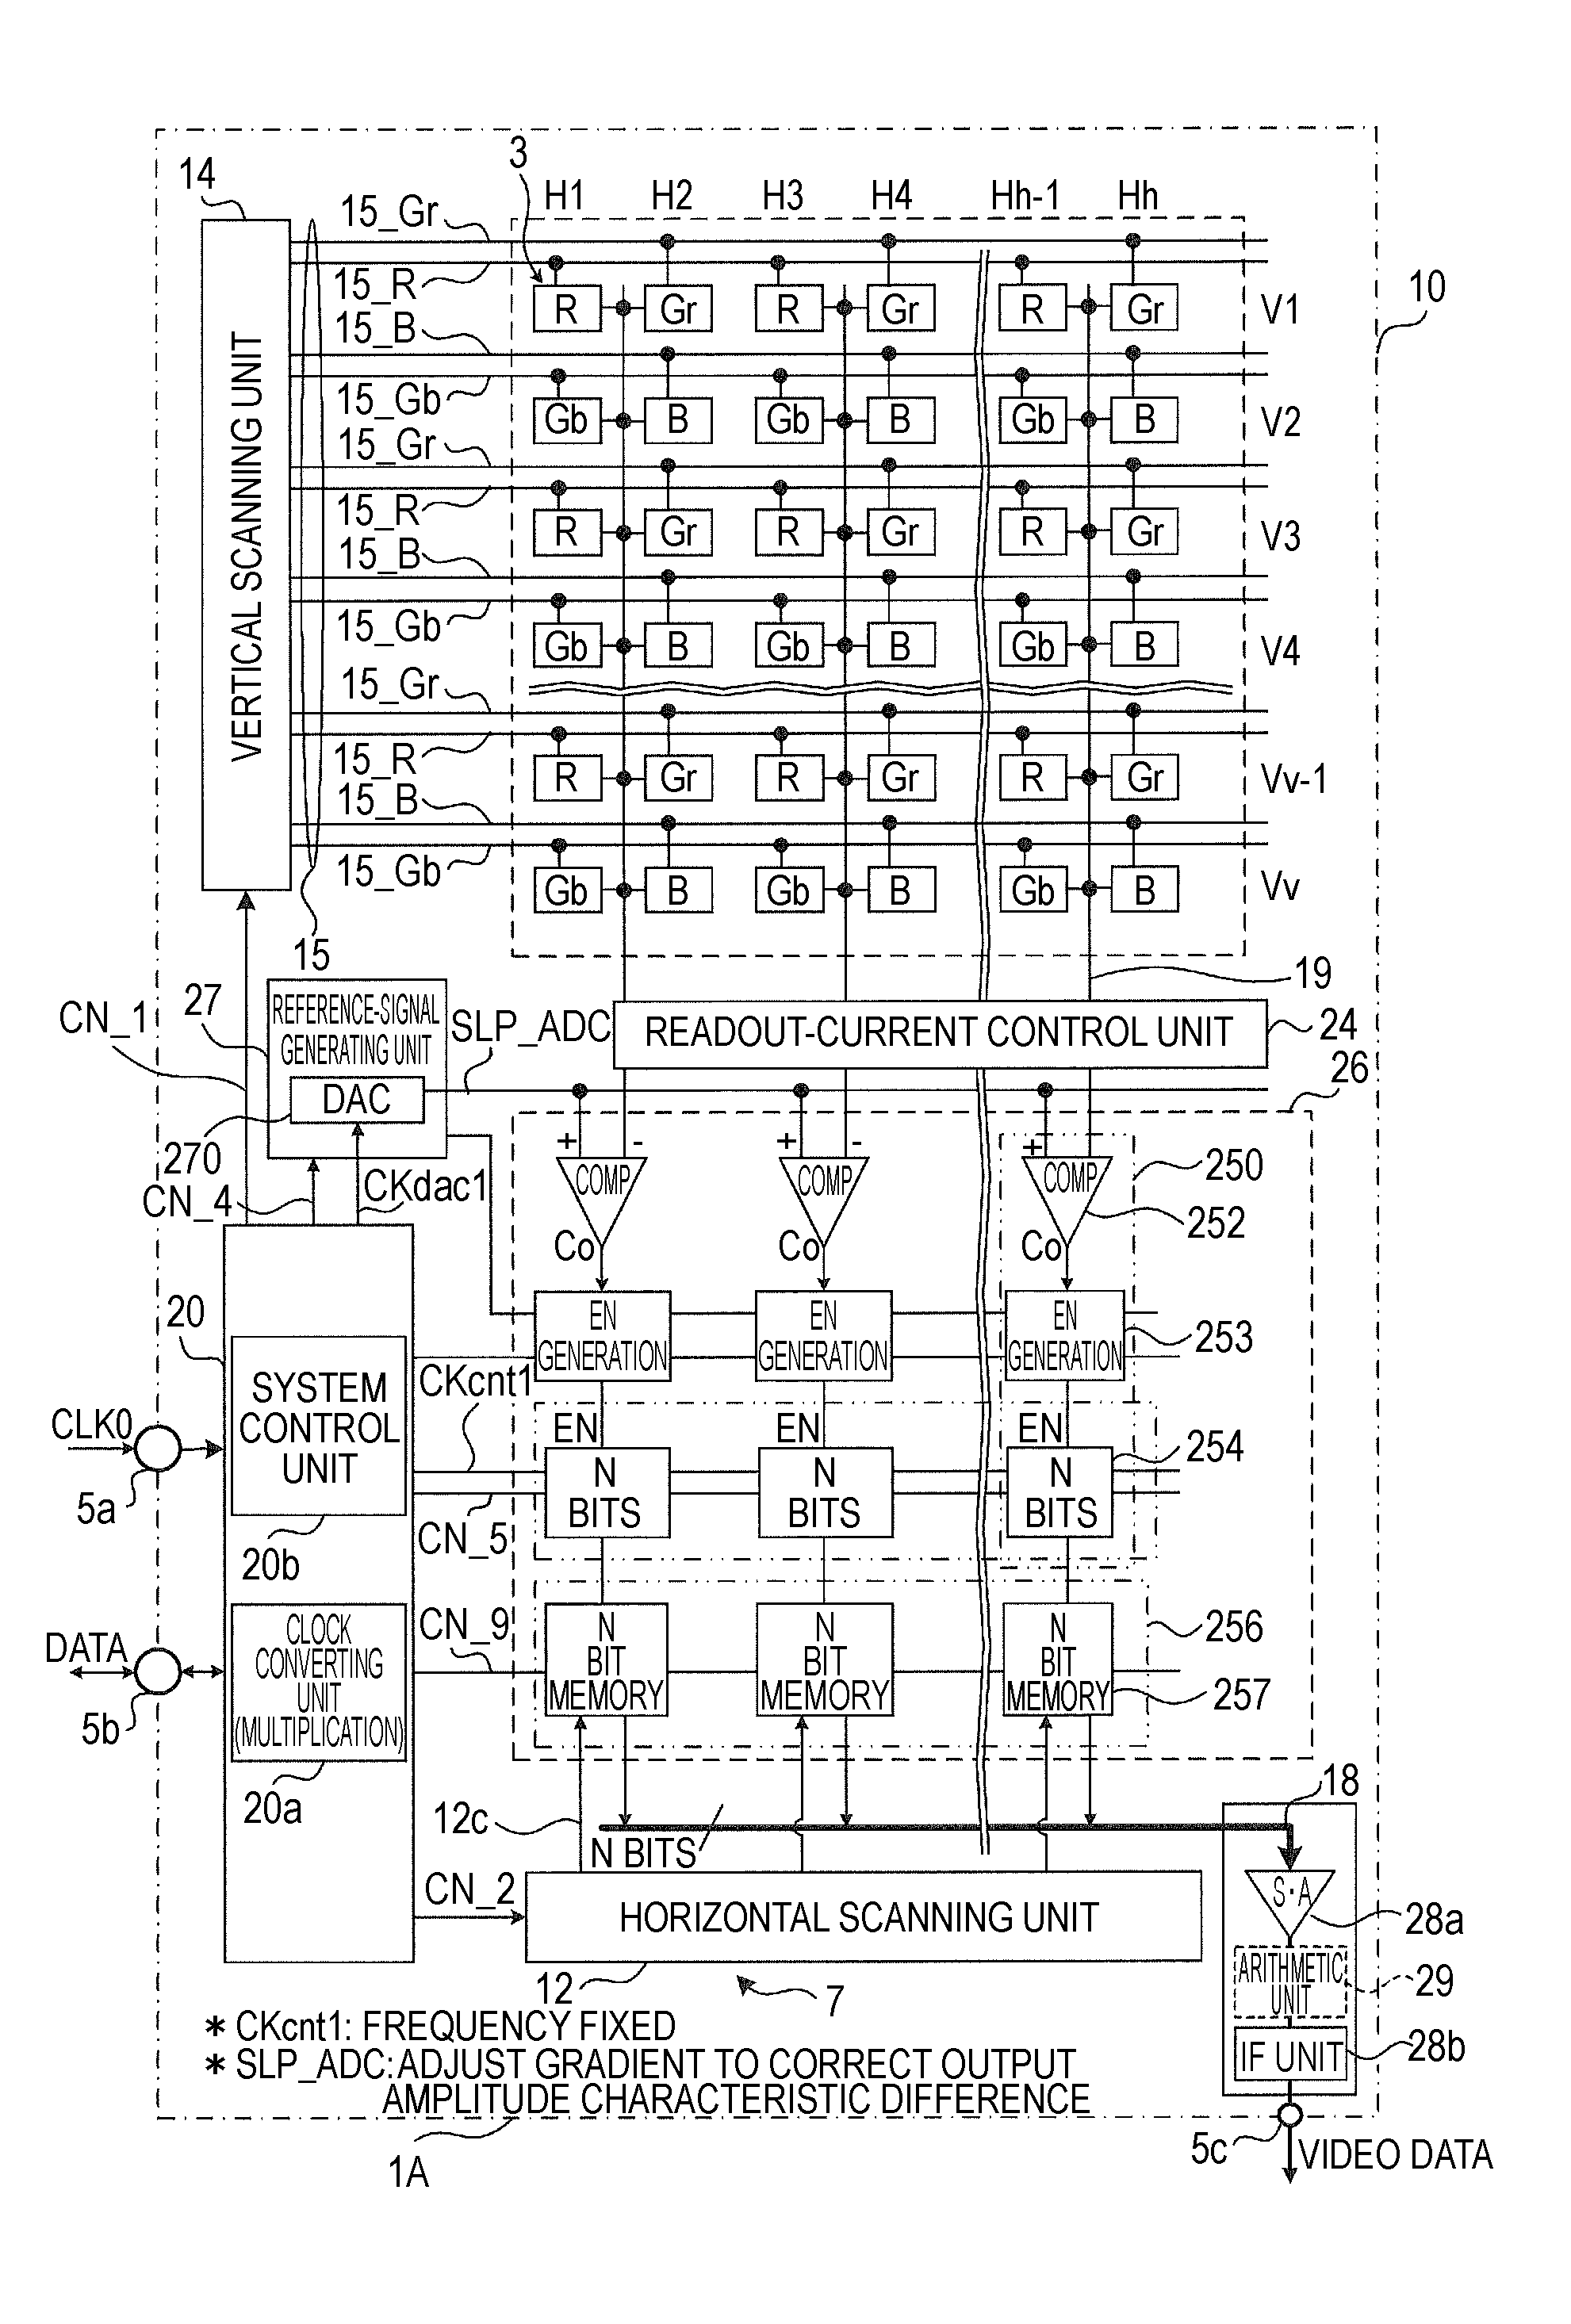 Solid-state imaging device, imaging apparatus, and ad conversion gain adjusting method